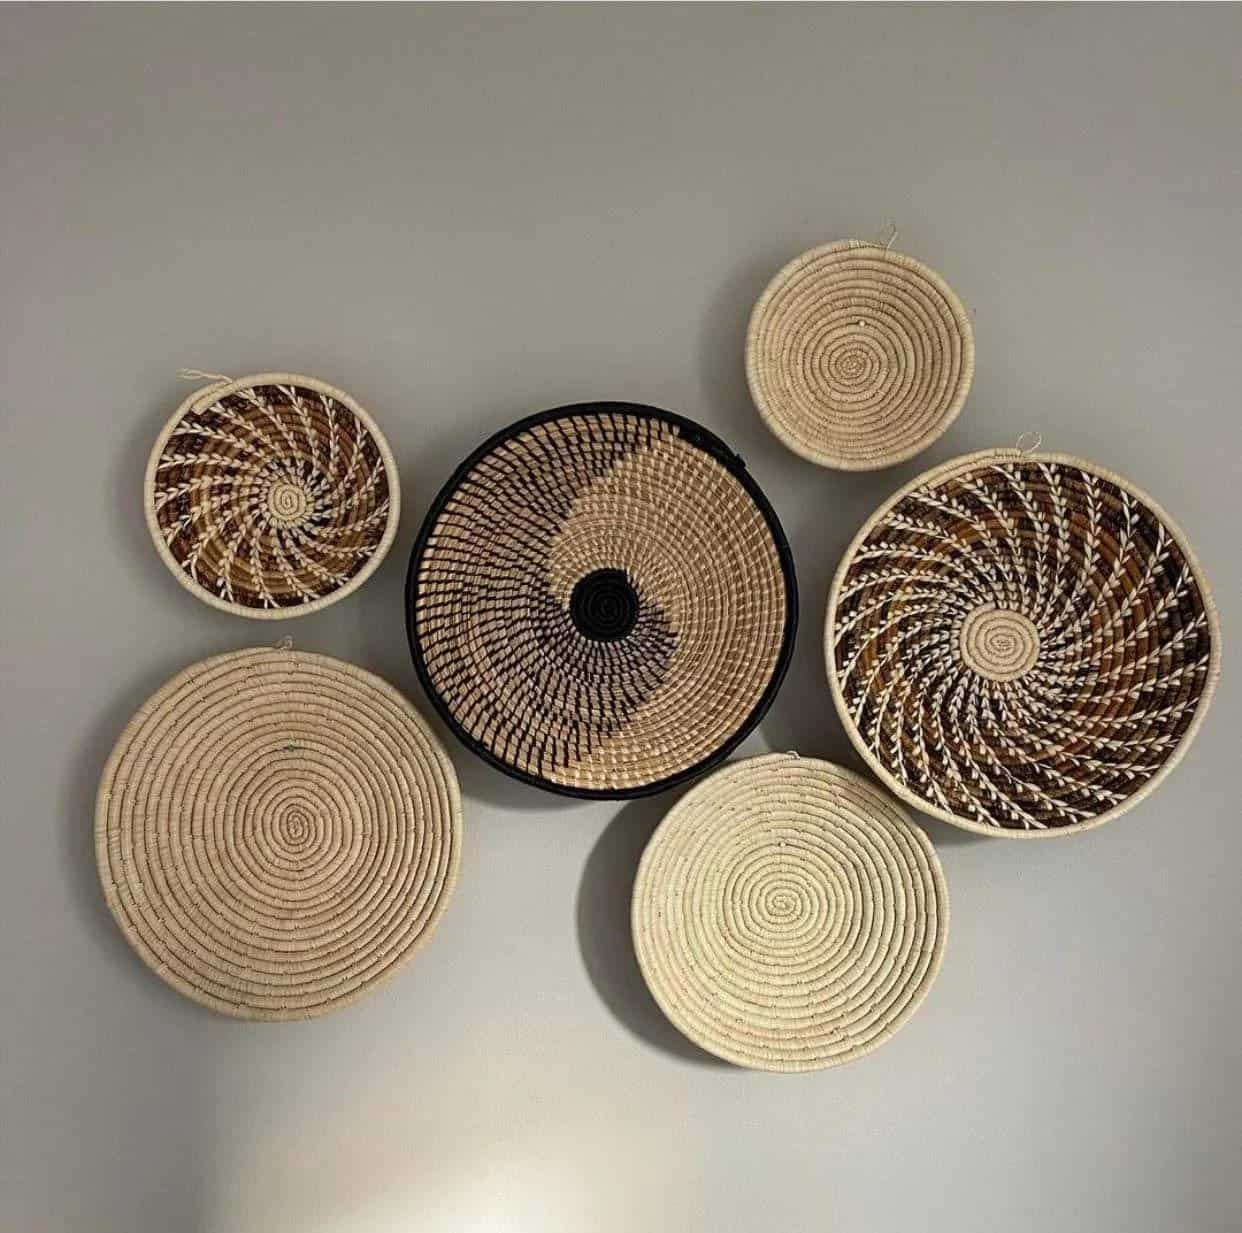 Display Baskets On Your Walls For A Boho Look